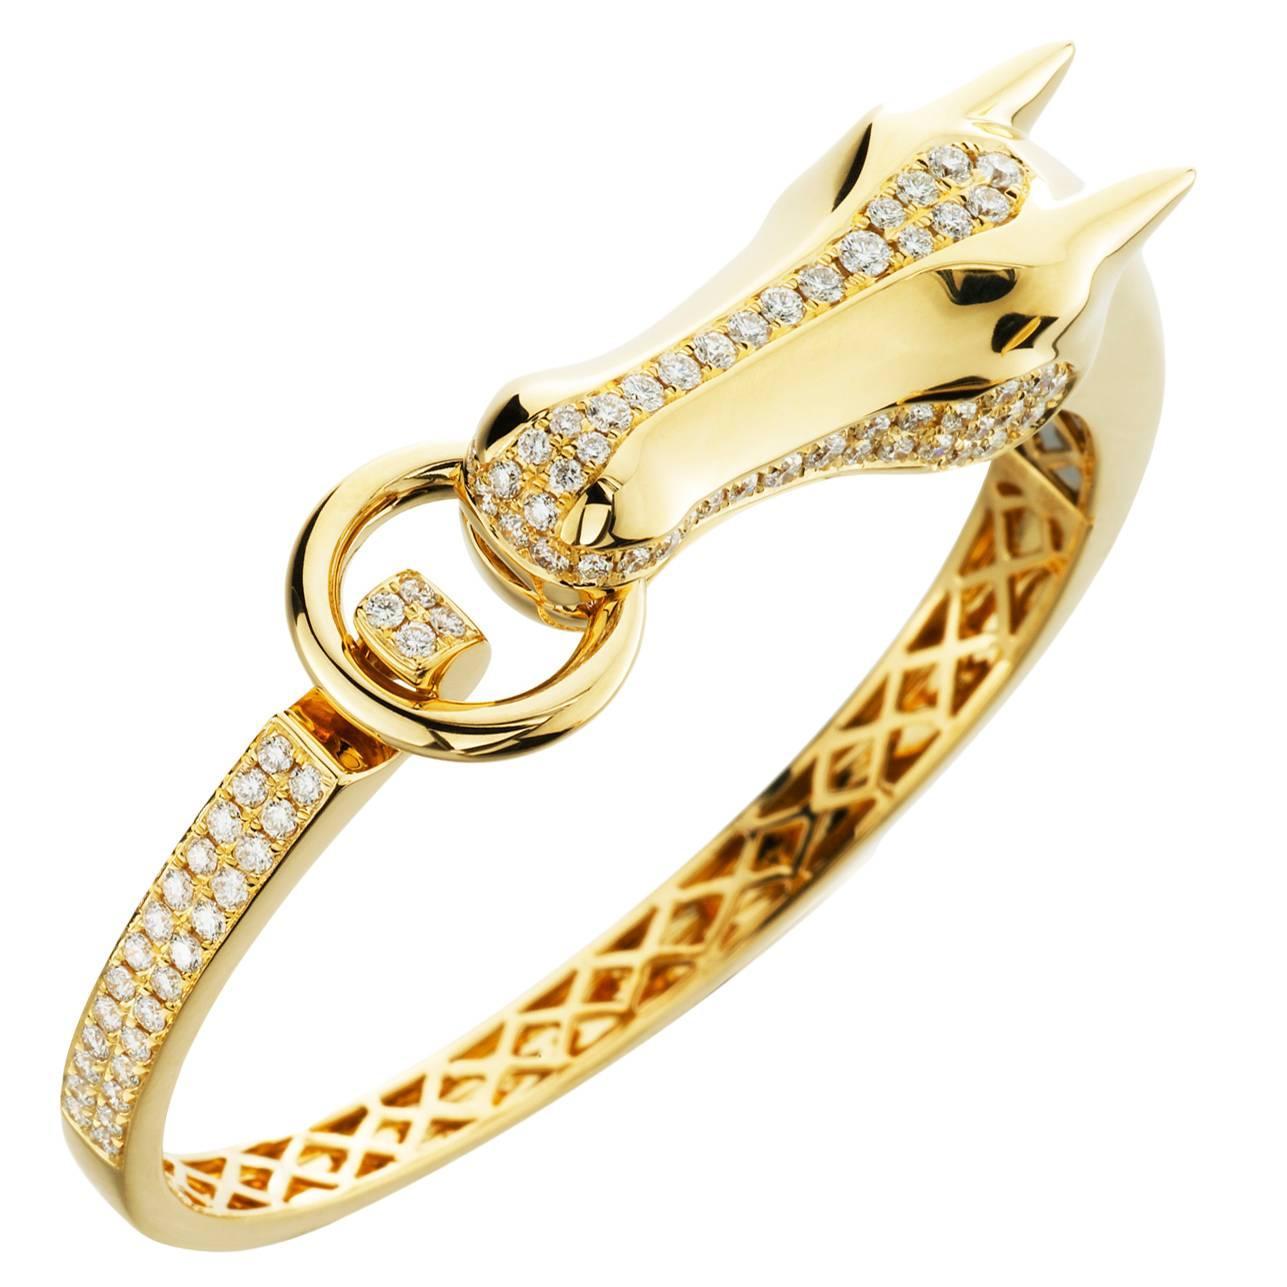 Diamond Gold Equestrian Horse Cuff Bracelet For Sale at 1stdibs